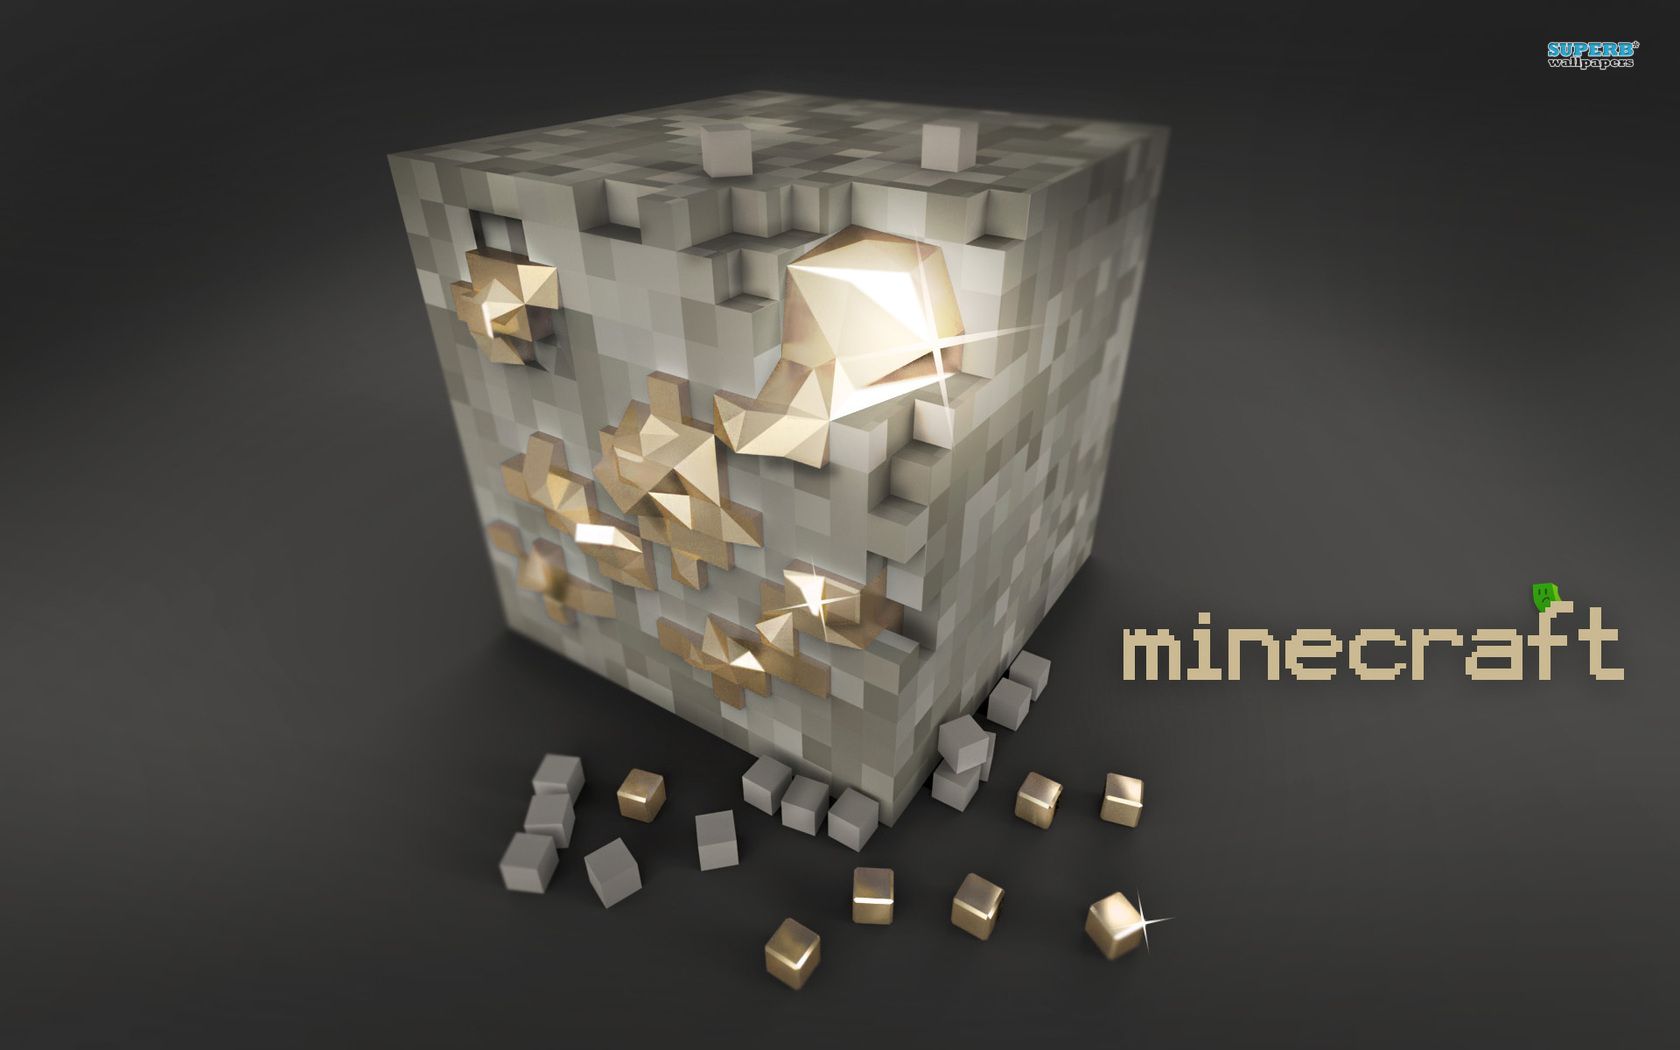 Minecraft wallpaper - Game wallpapers - #7813